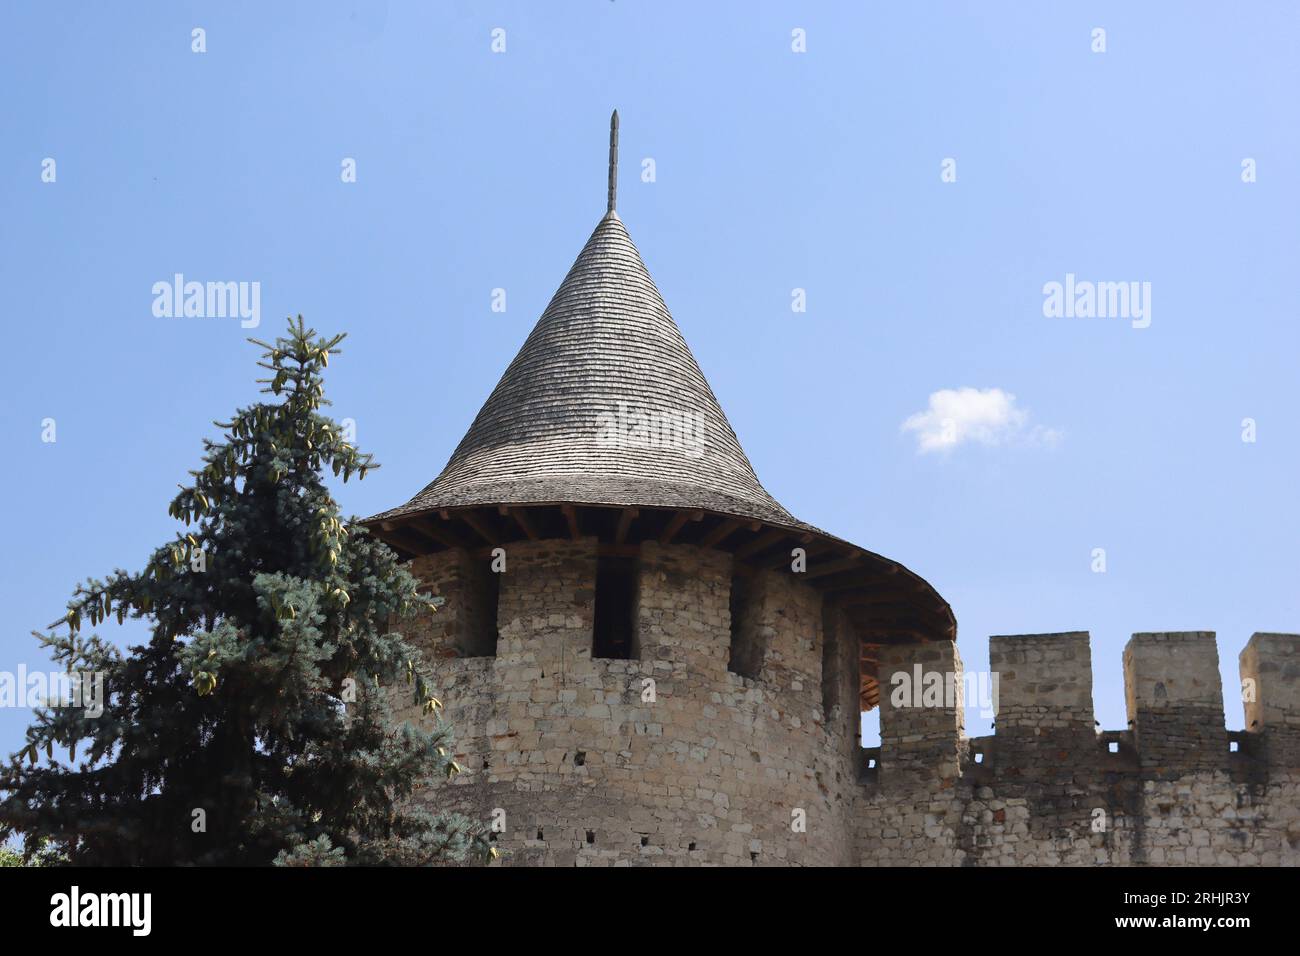 View of medieval fort in Soroca, Republic of Moldova. Fort built in 1499 by Moldavian Prince Stephen the Great. Has been renovated in 2015 Stock Photo